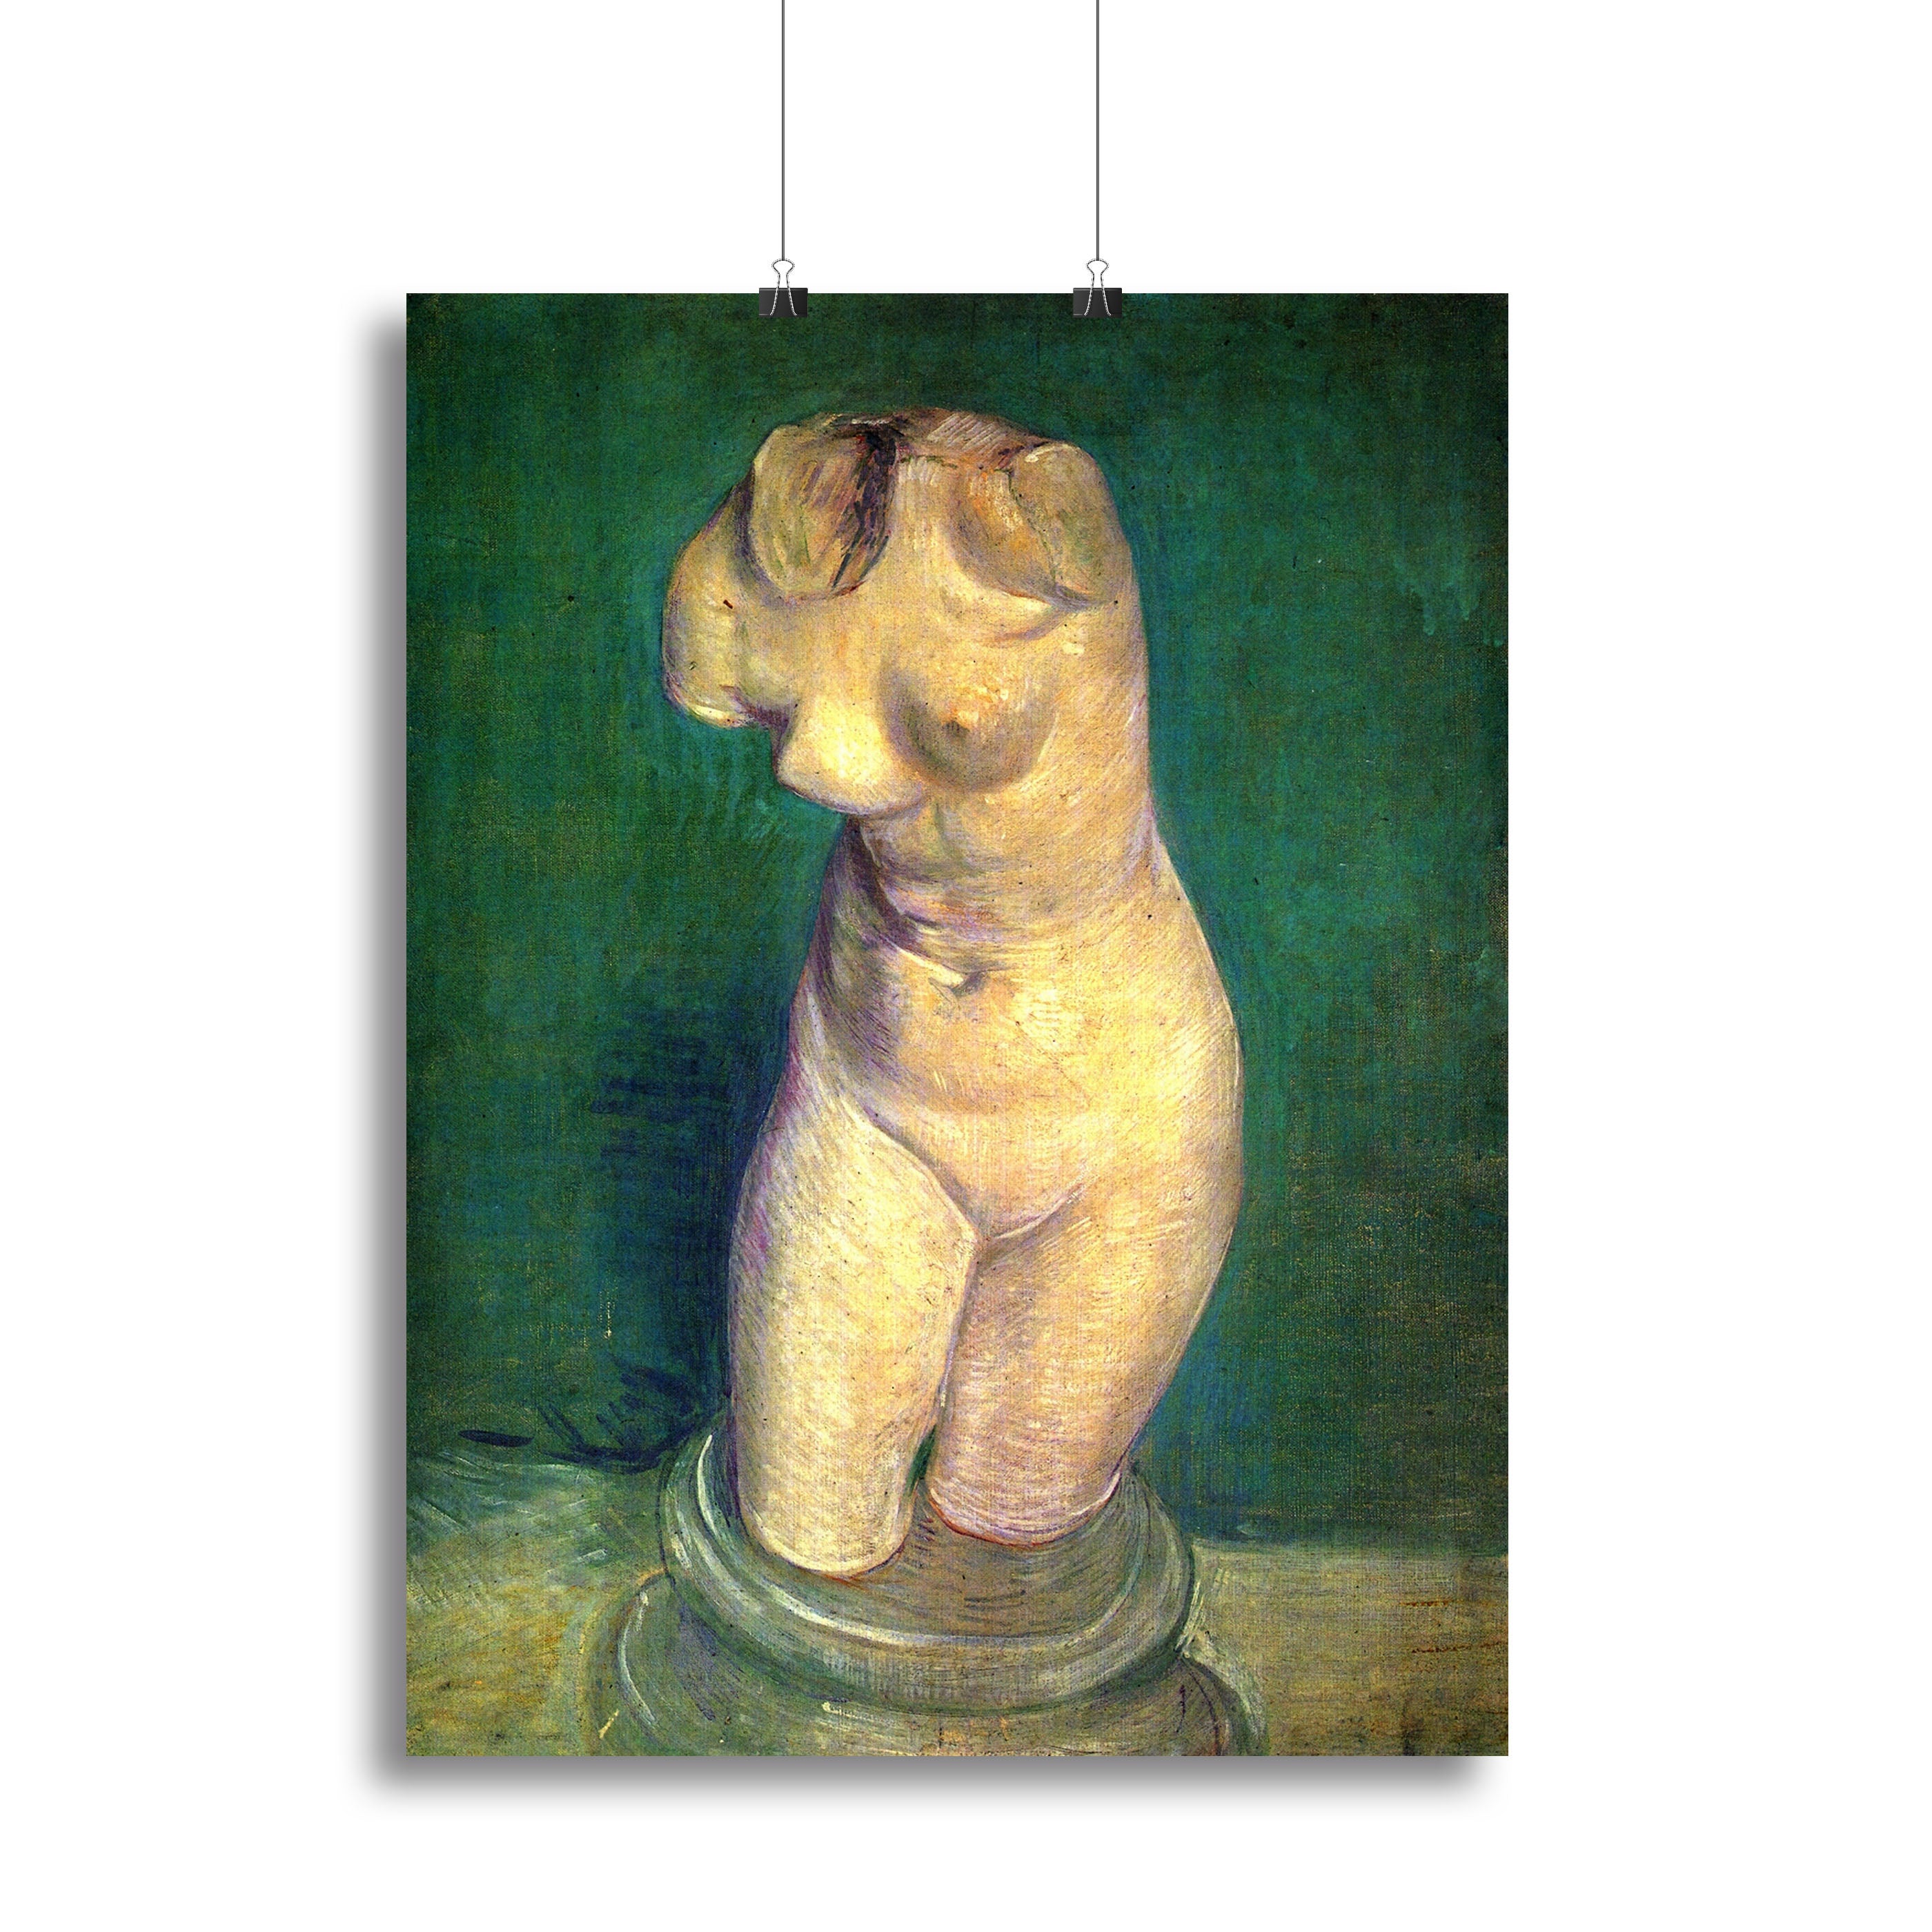 Plaster Statuette of a Female Torso by Van Gogh Canvas Print or Poster - Canvas Art Rocks - 2